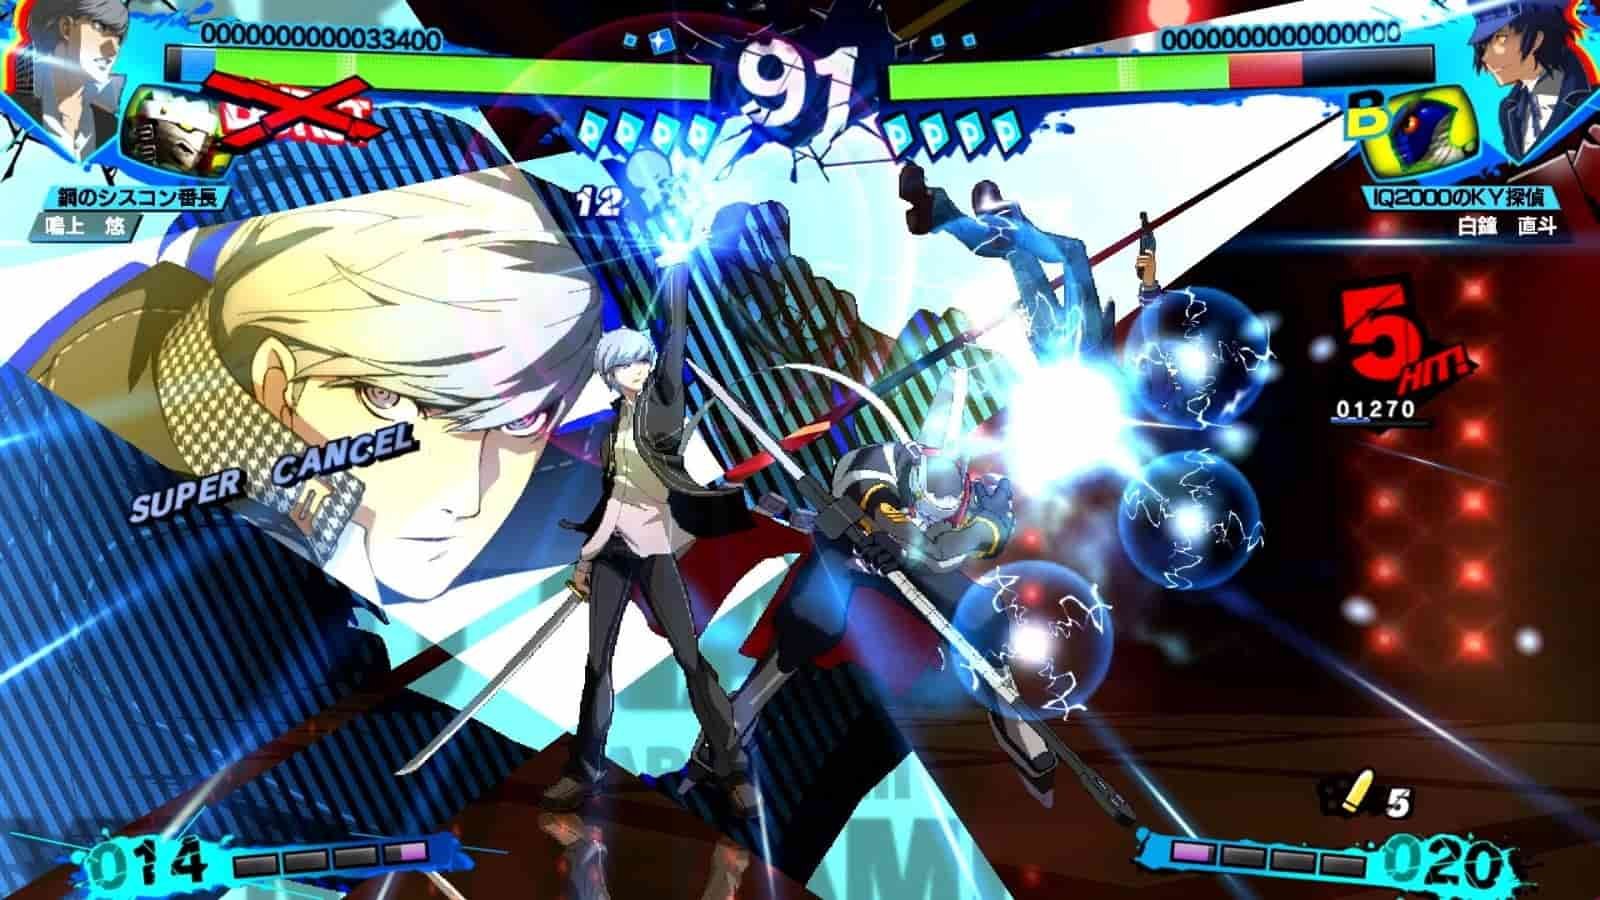 Persona 4: Arena Ultimax, P4U, Persona, Fighting, PlayStation 4, PS4, PlayStation 4, Switch, Nintendo Switch, release date, trailer, screenshots, pre-order now, Japan